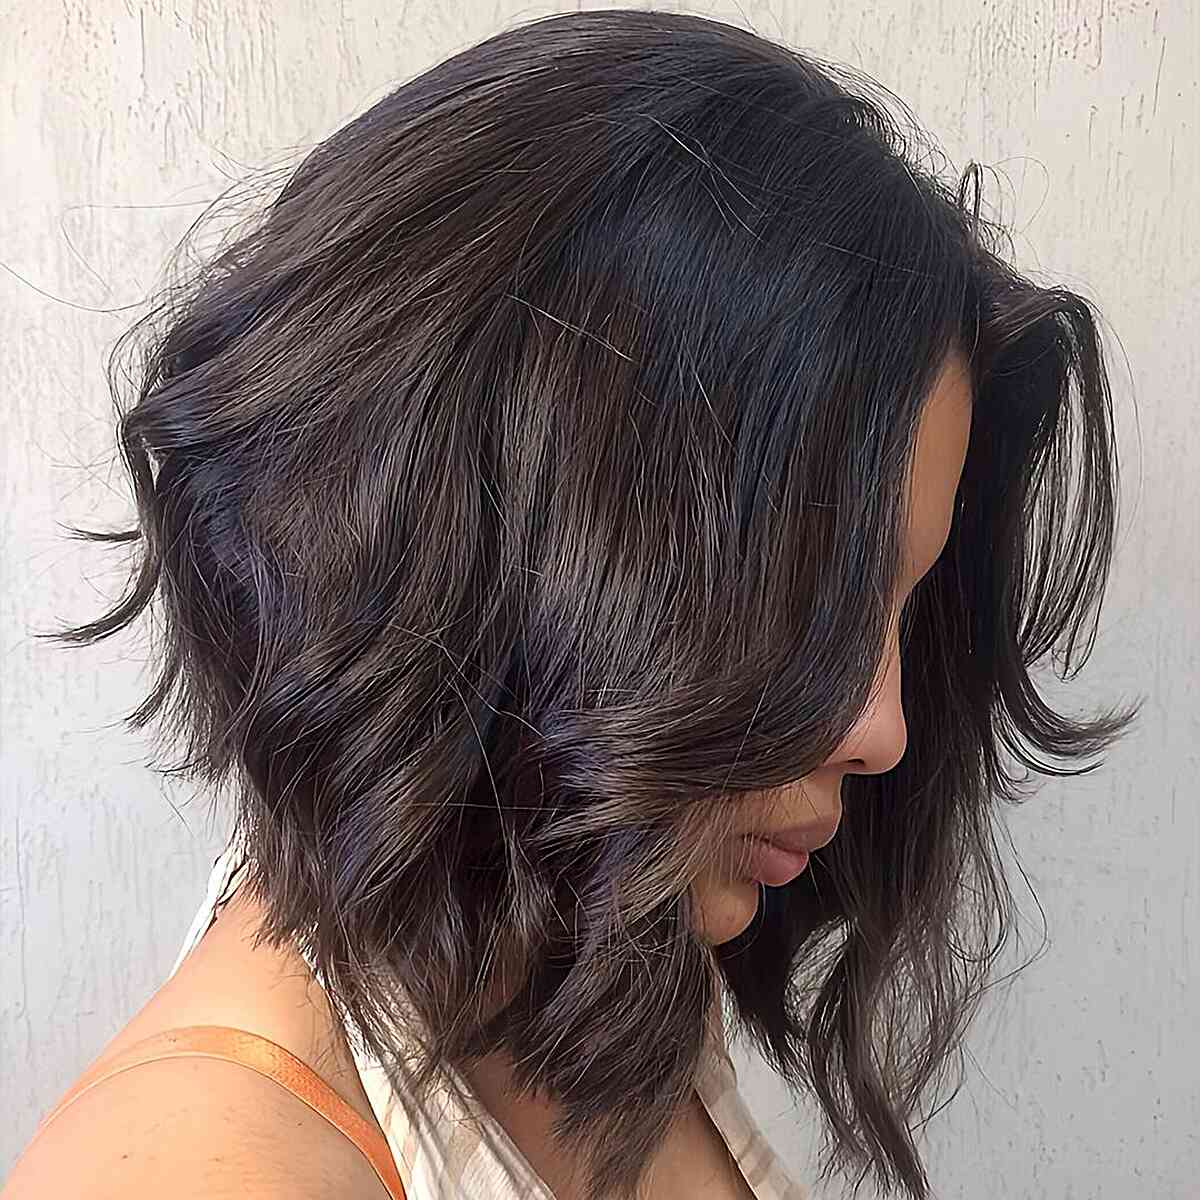 Neck-Length Stacked Angled Long Bob with Jagged Layers